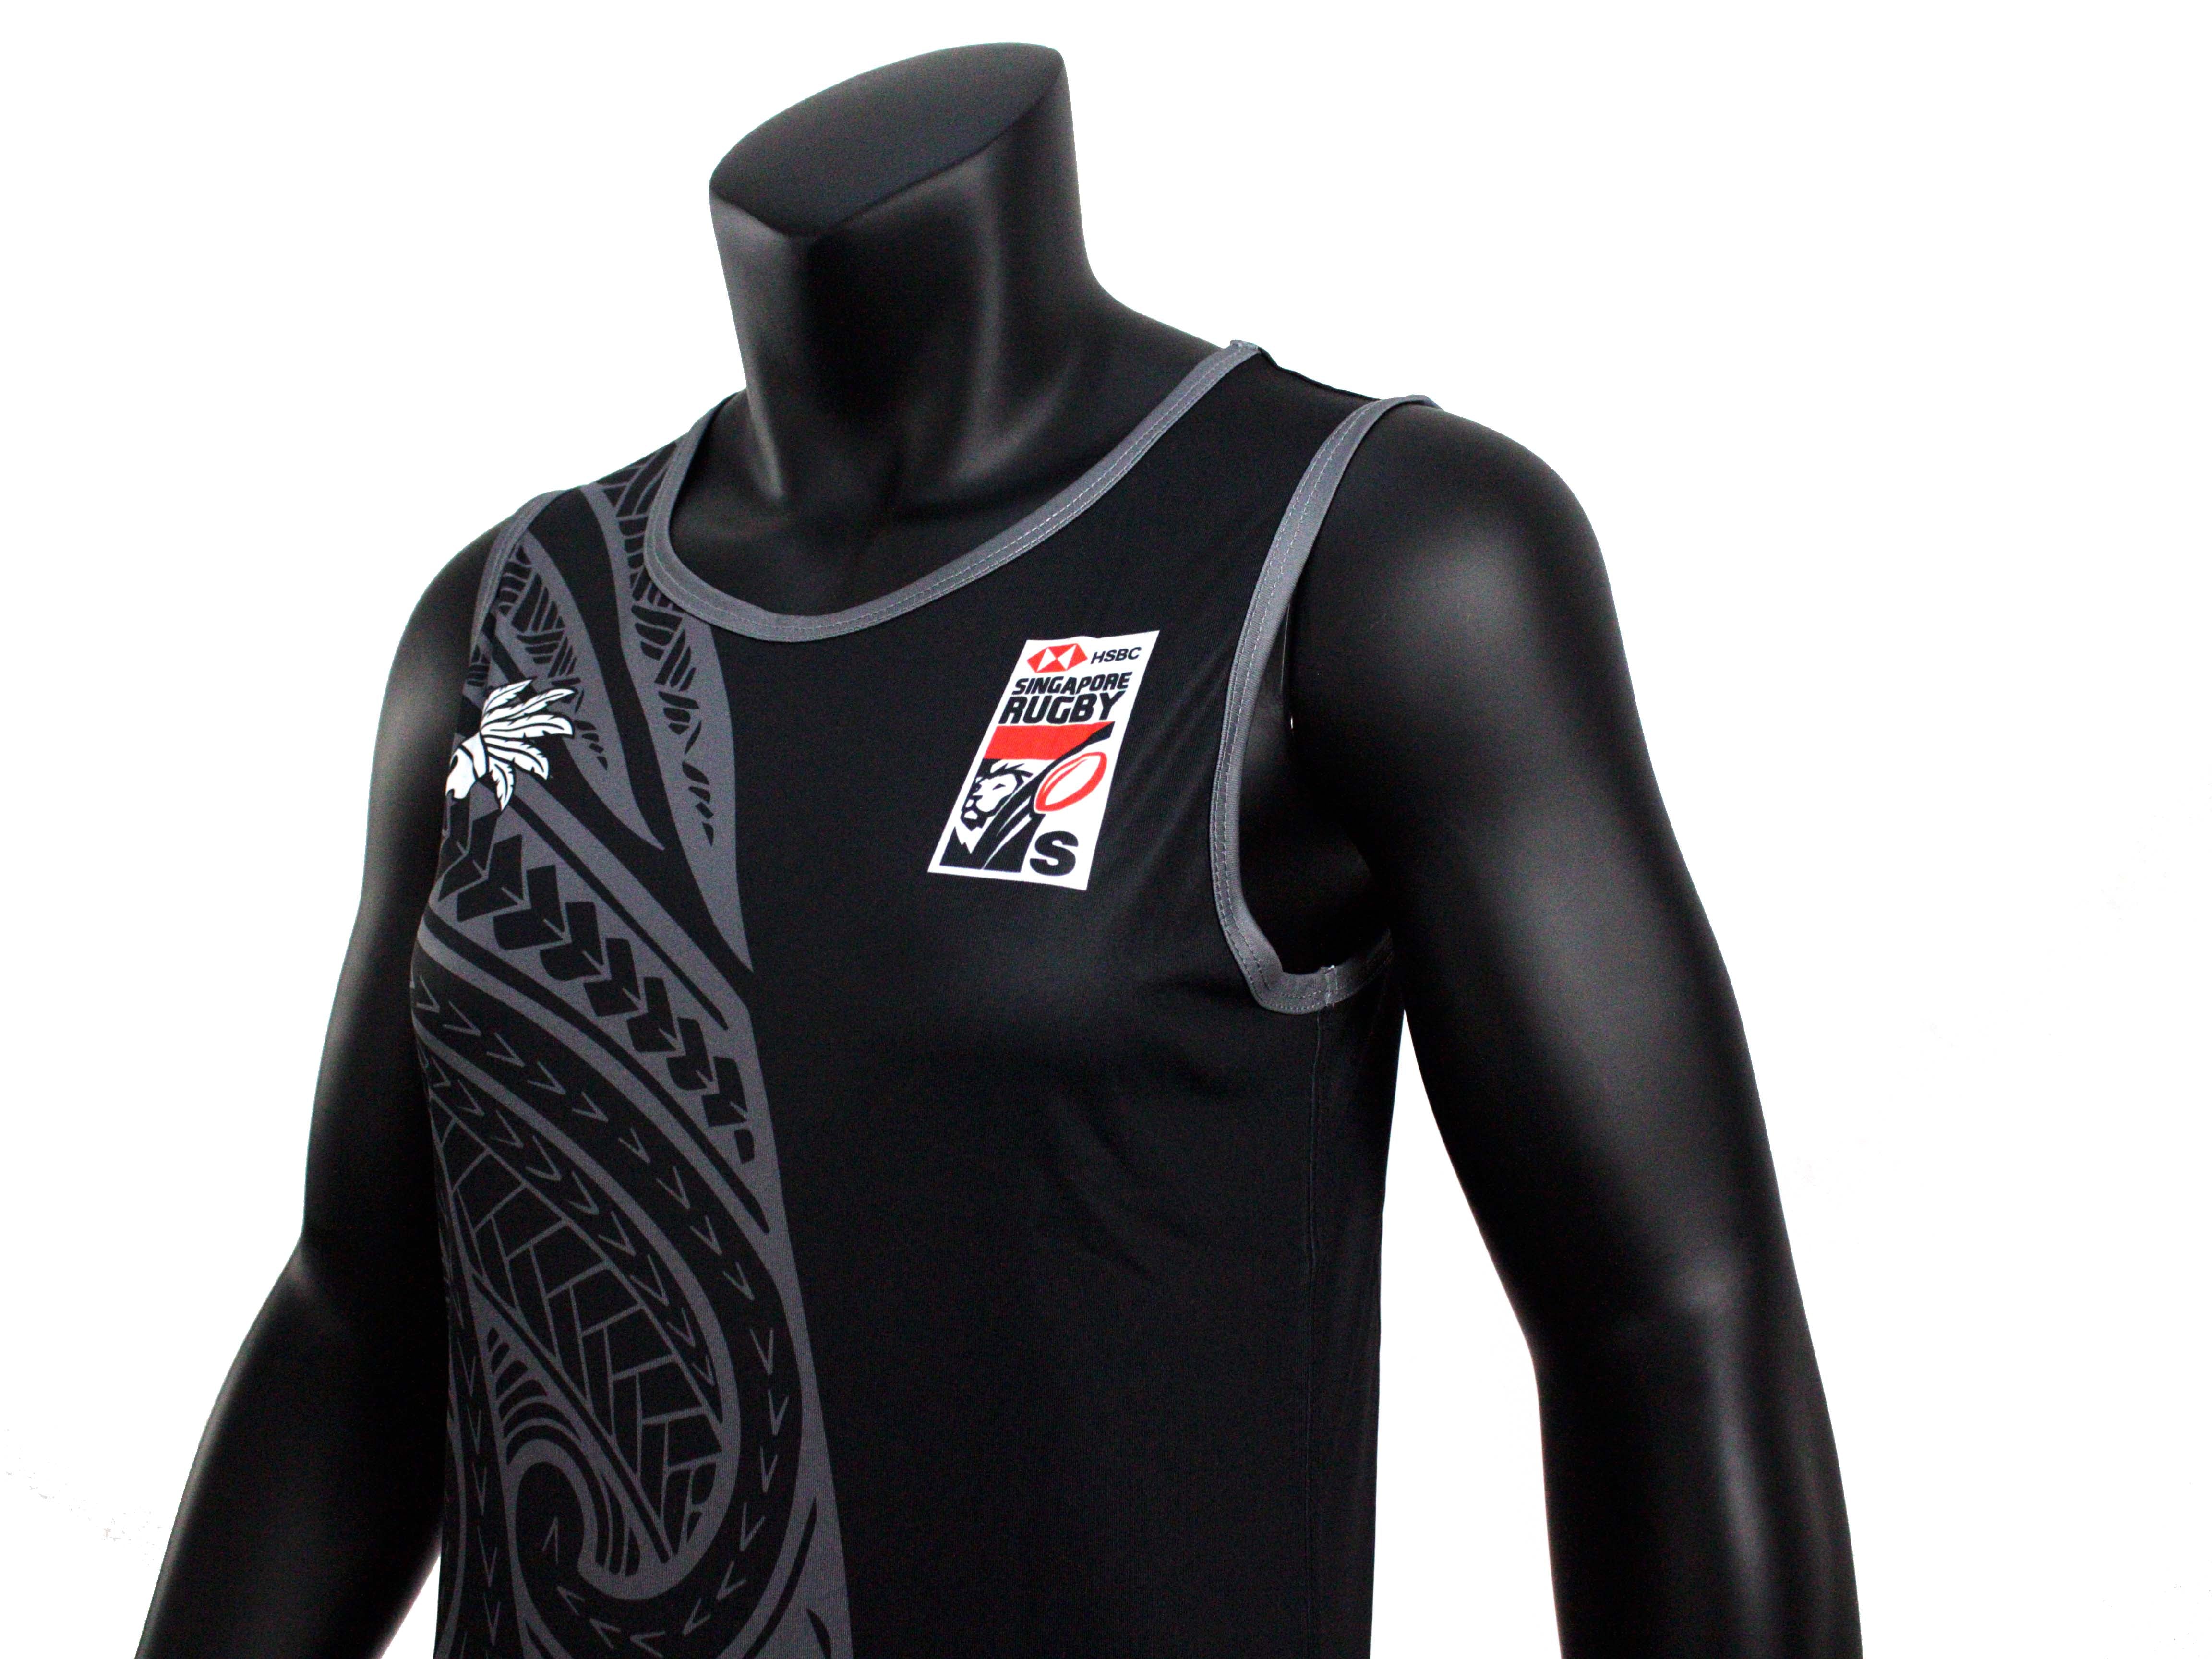 NEW ZEALAND RUGBY SINGLET